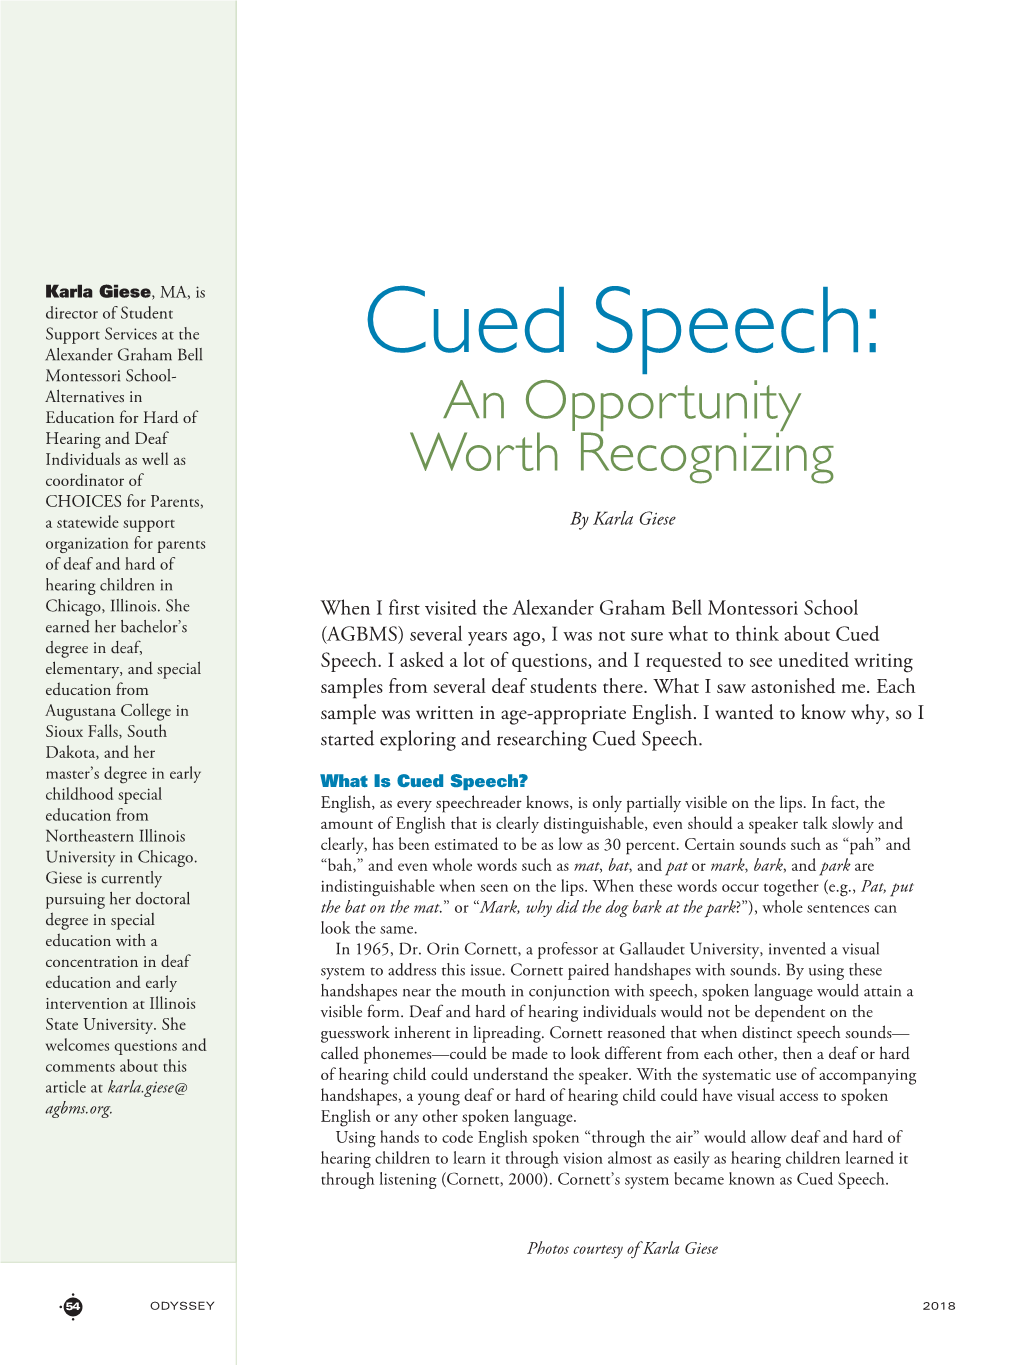 Cued Speech: an Opportunity Worth Recognizing